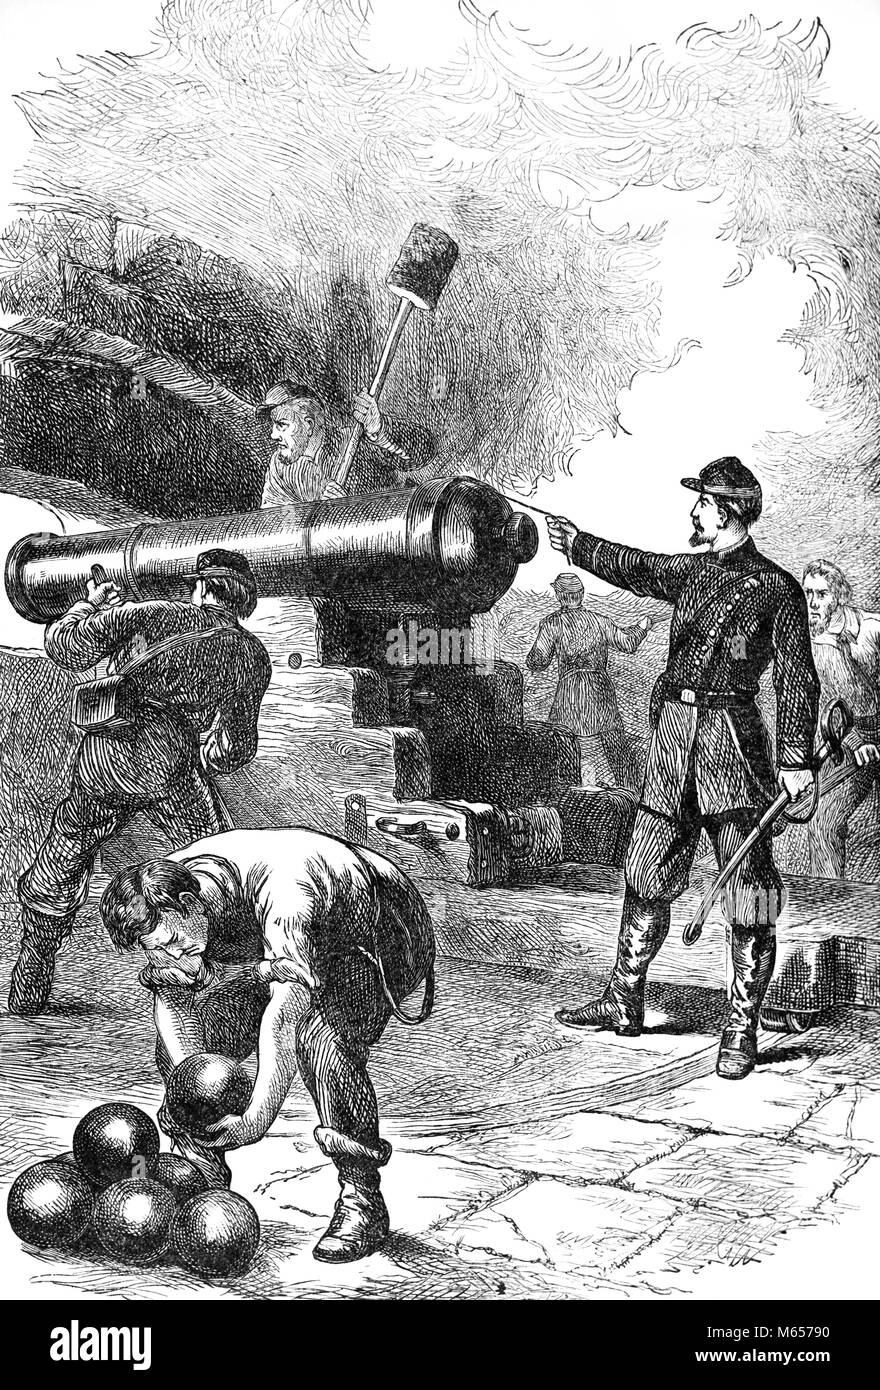 1860s UNION SOLDIERS FIRING CANNON AT FORT SUMTER CHARLESTON HARBOR SOUTH CAROLINA USA - h9855 HAR001 HARS FIREARM FIREARMS MALES SOUTH CAROLINA AMERICAN CIVIL WAR APRIL APRIL 12 ARTILLERY B&W BATTLES BEGINNING BLACK AND WHITE CIVIL WAR CONFLICTS FORT SUMTER OLD FASHIONED PERSONS SUMTER UNION TROOPS Stock Photo